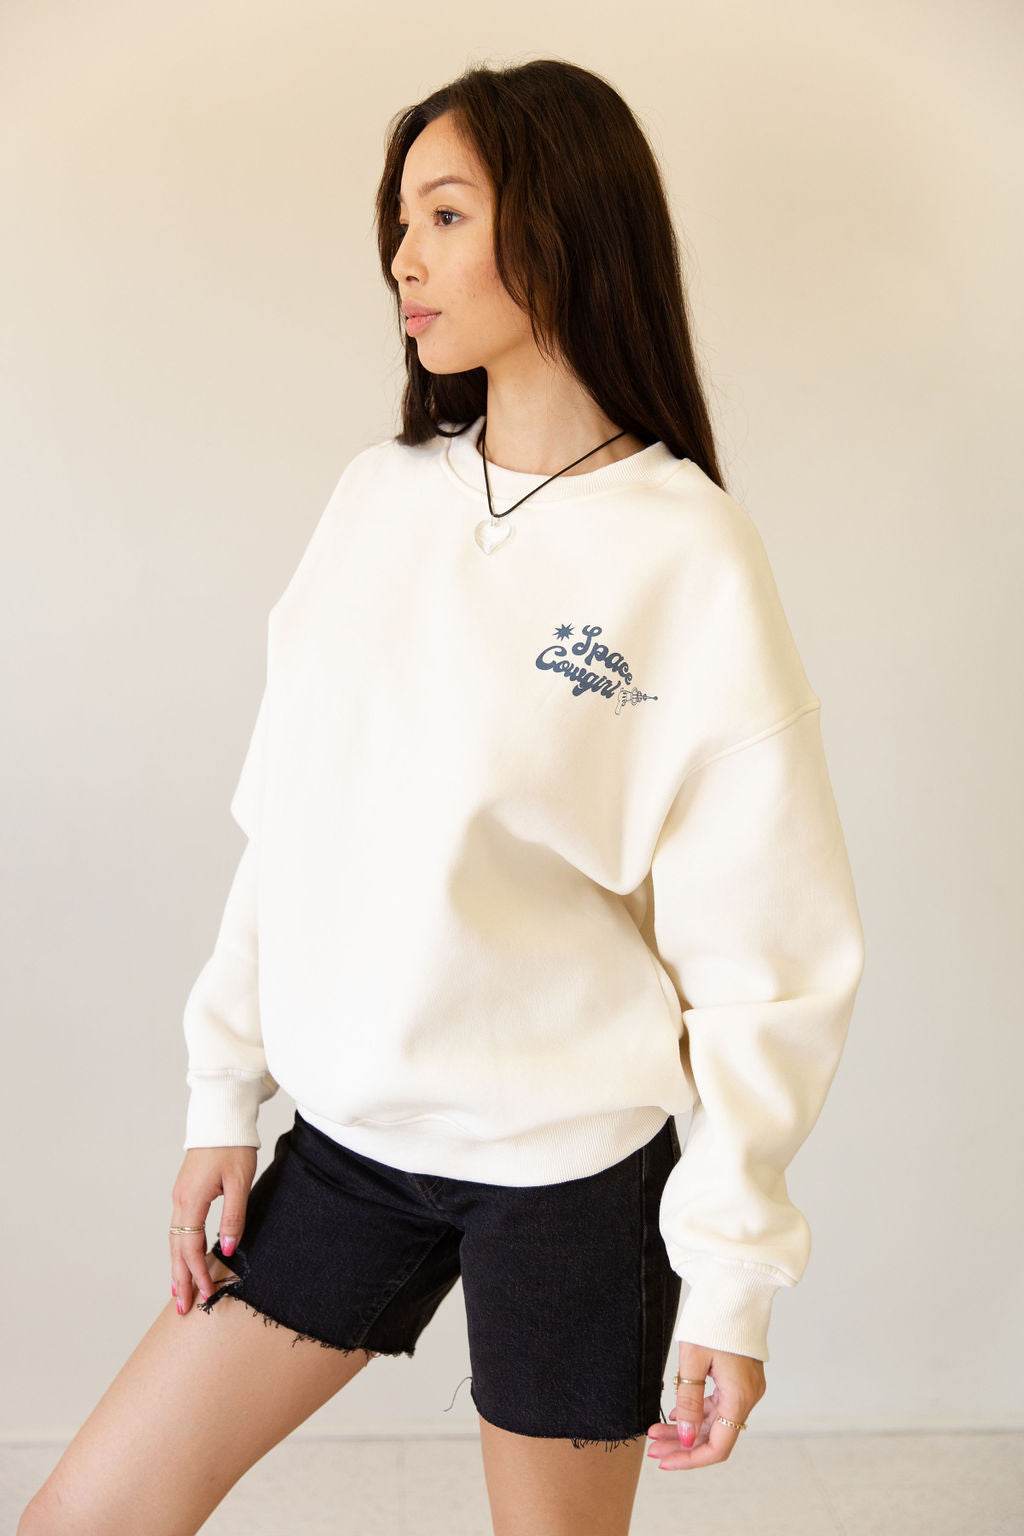 Space Cowgirl Graphic Sweater